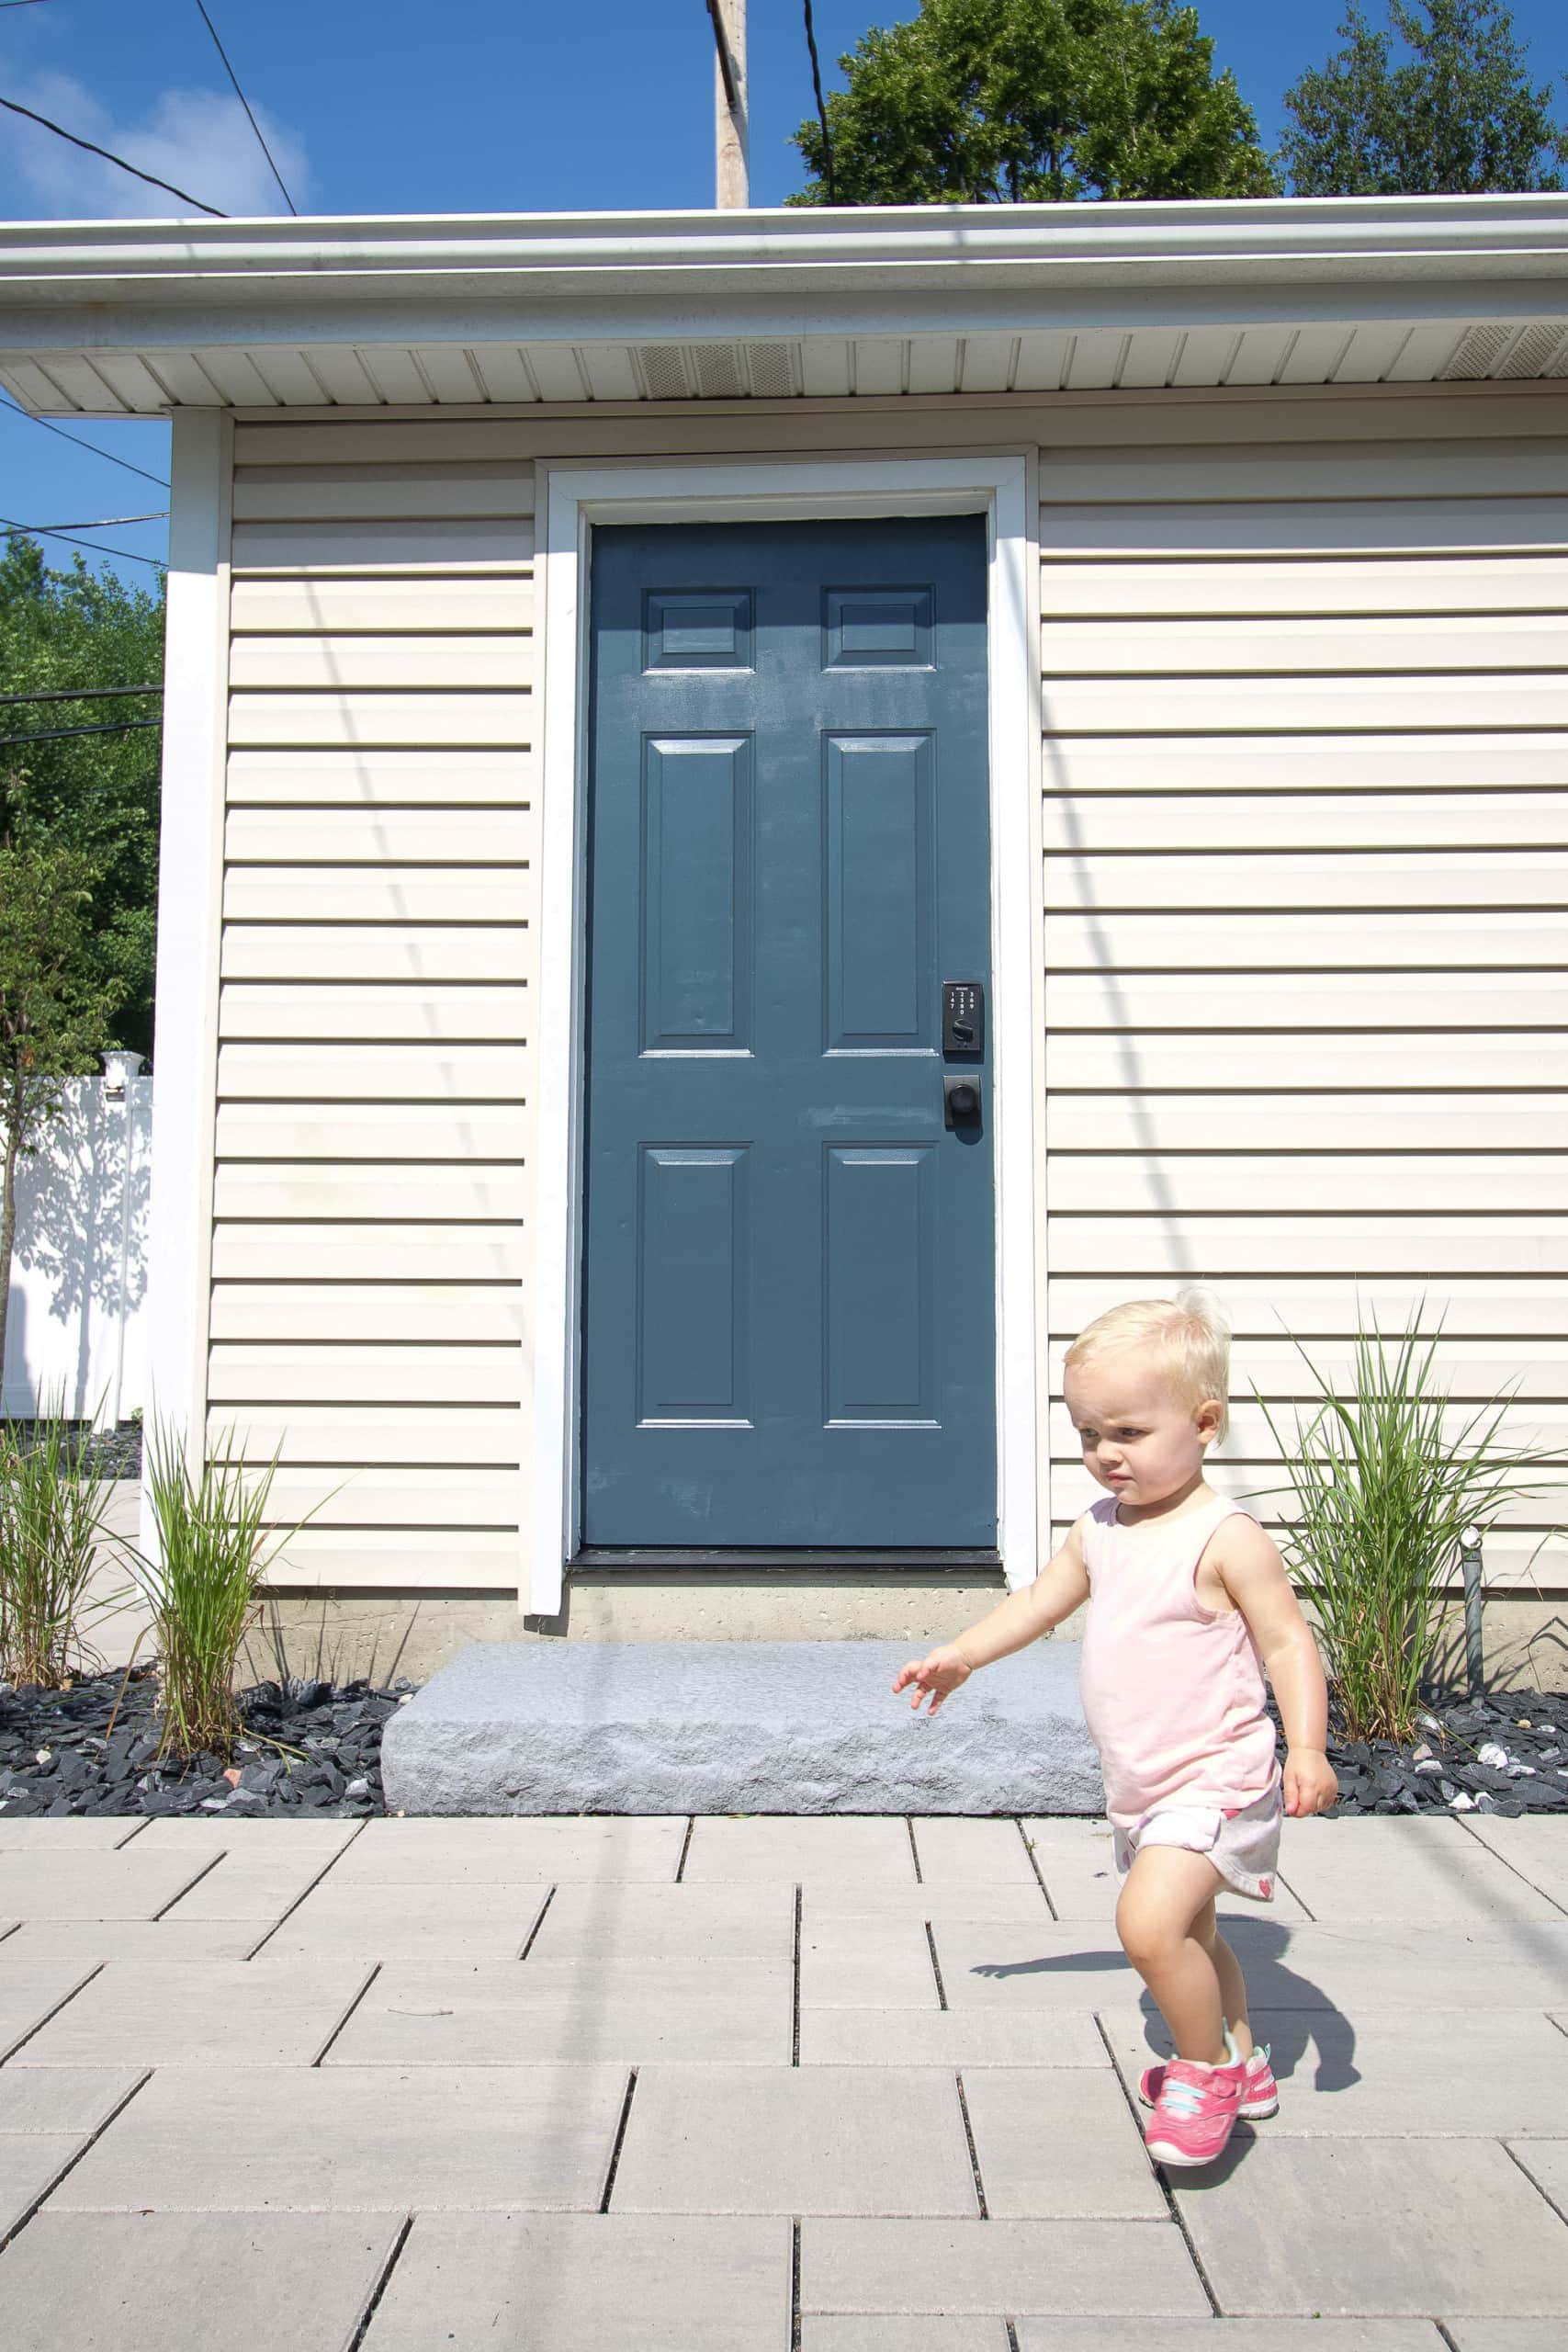 Our backyard DIY projects include painting the garage door